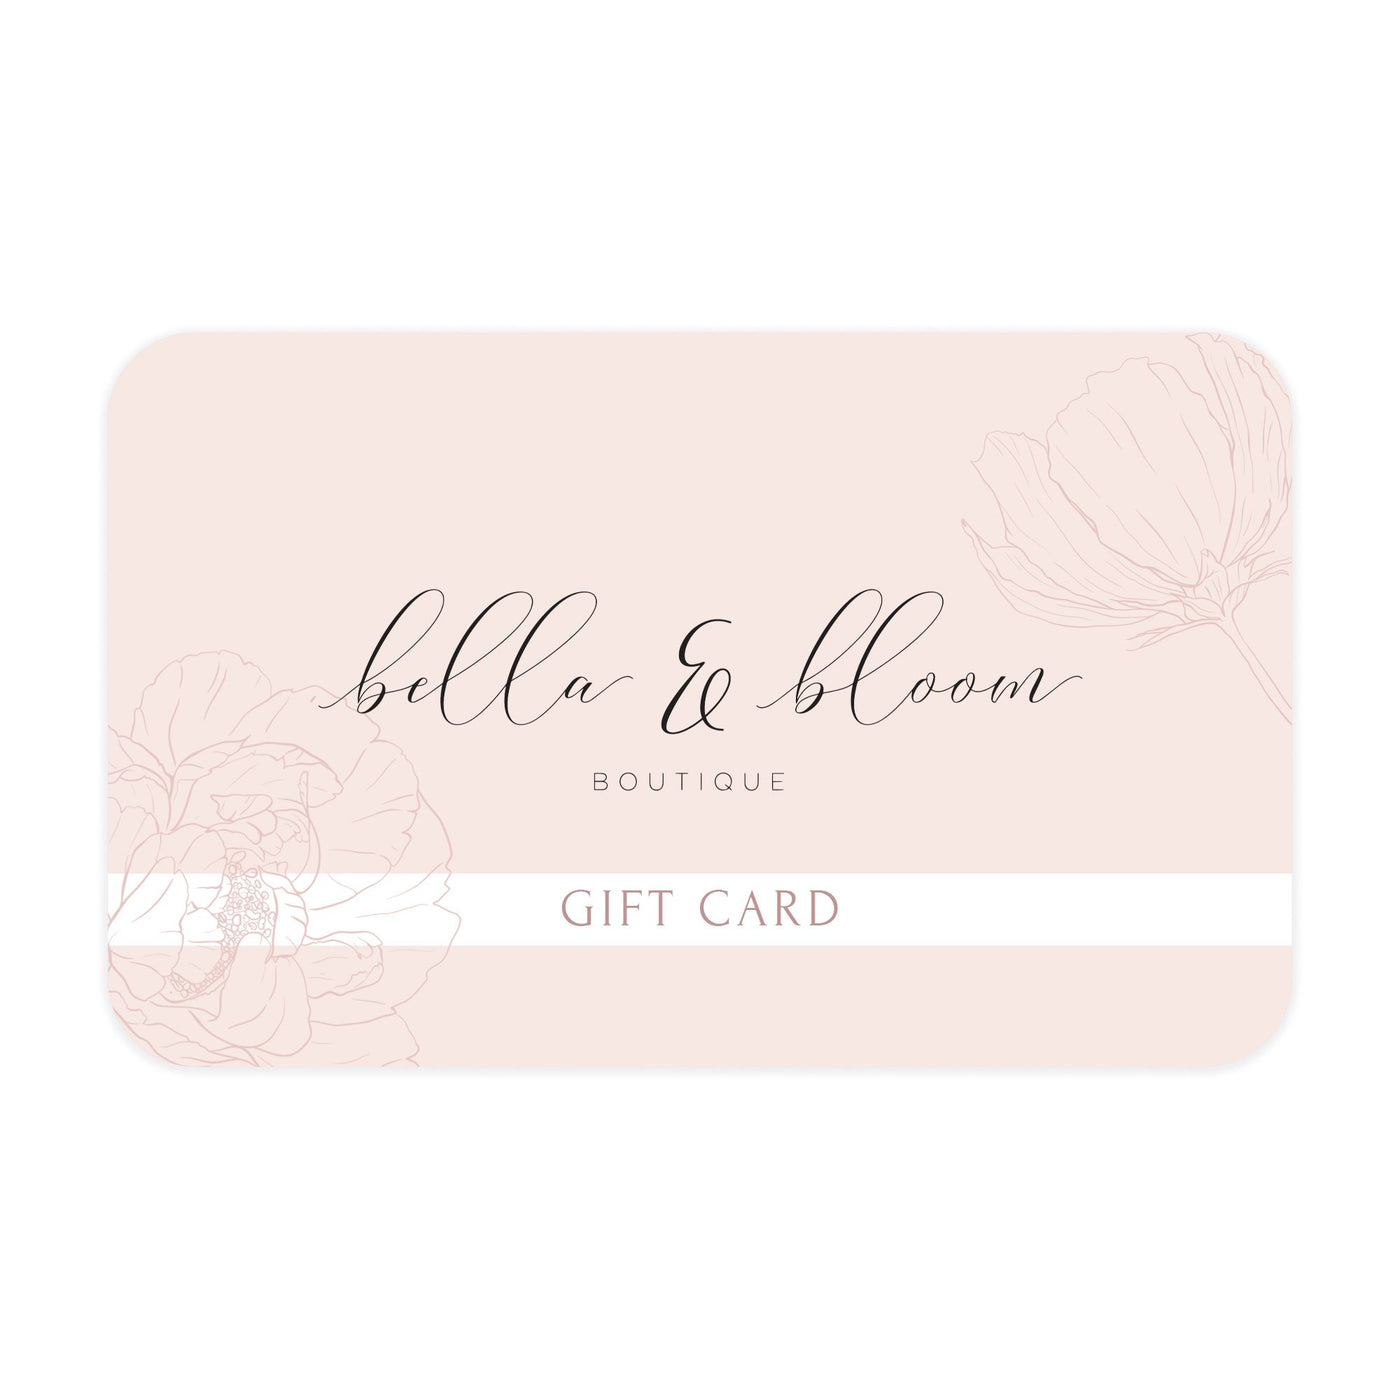 Gift Card - Bella and Bloom Boutique